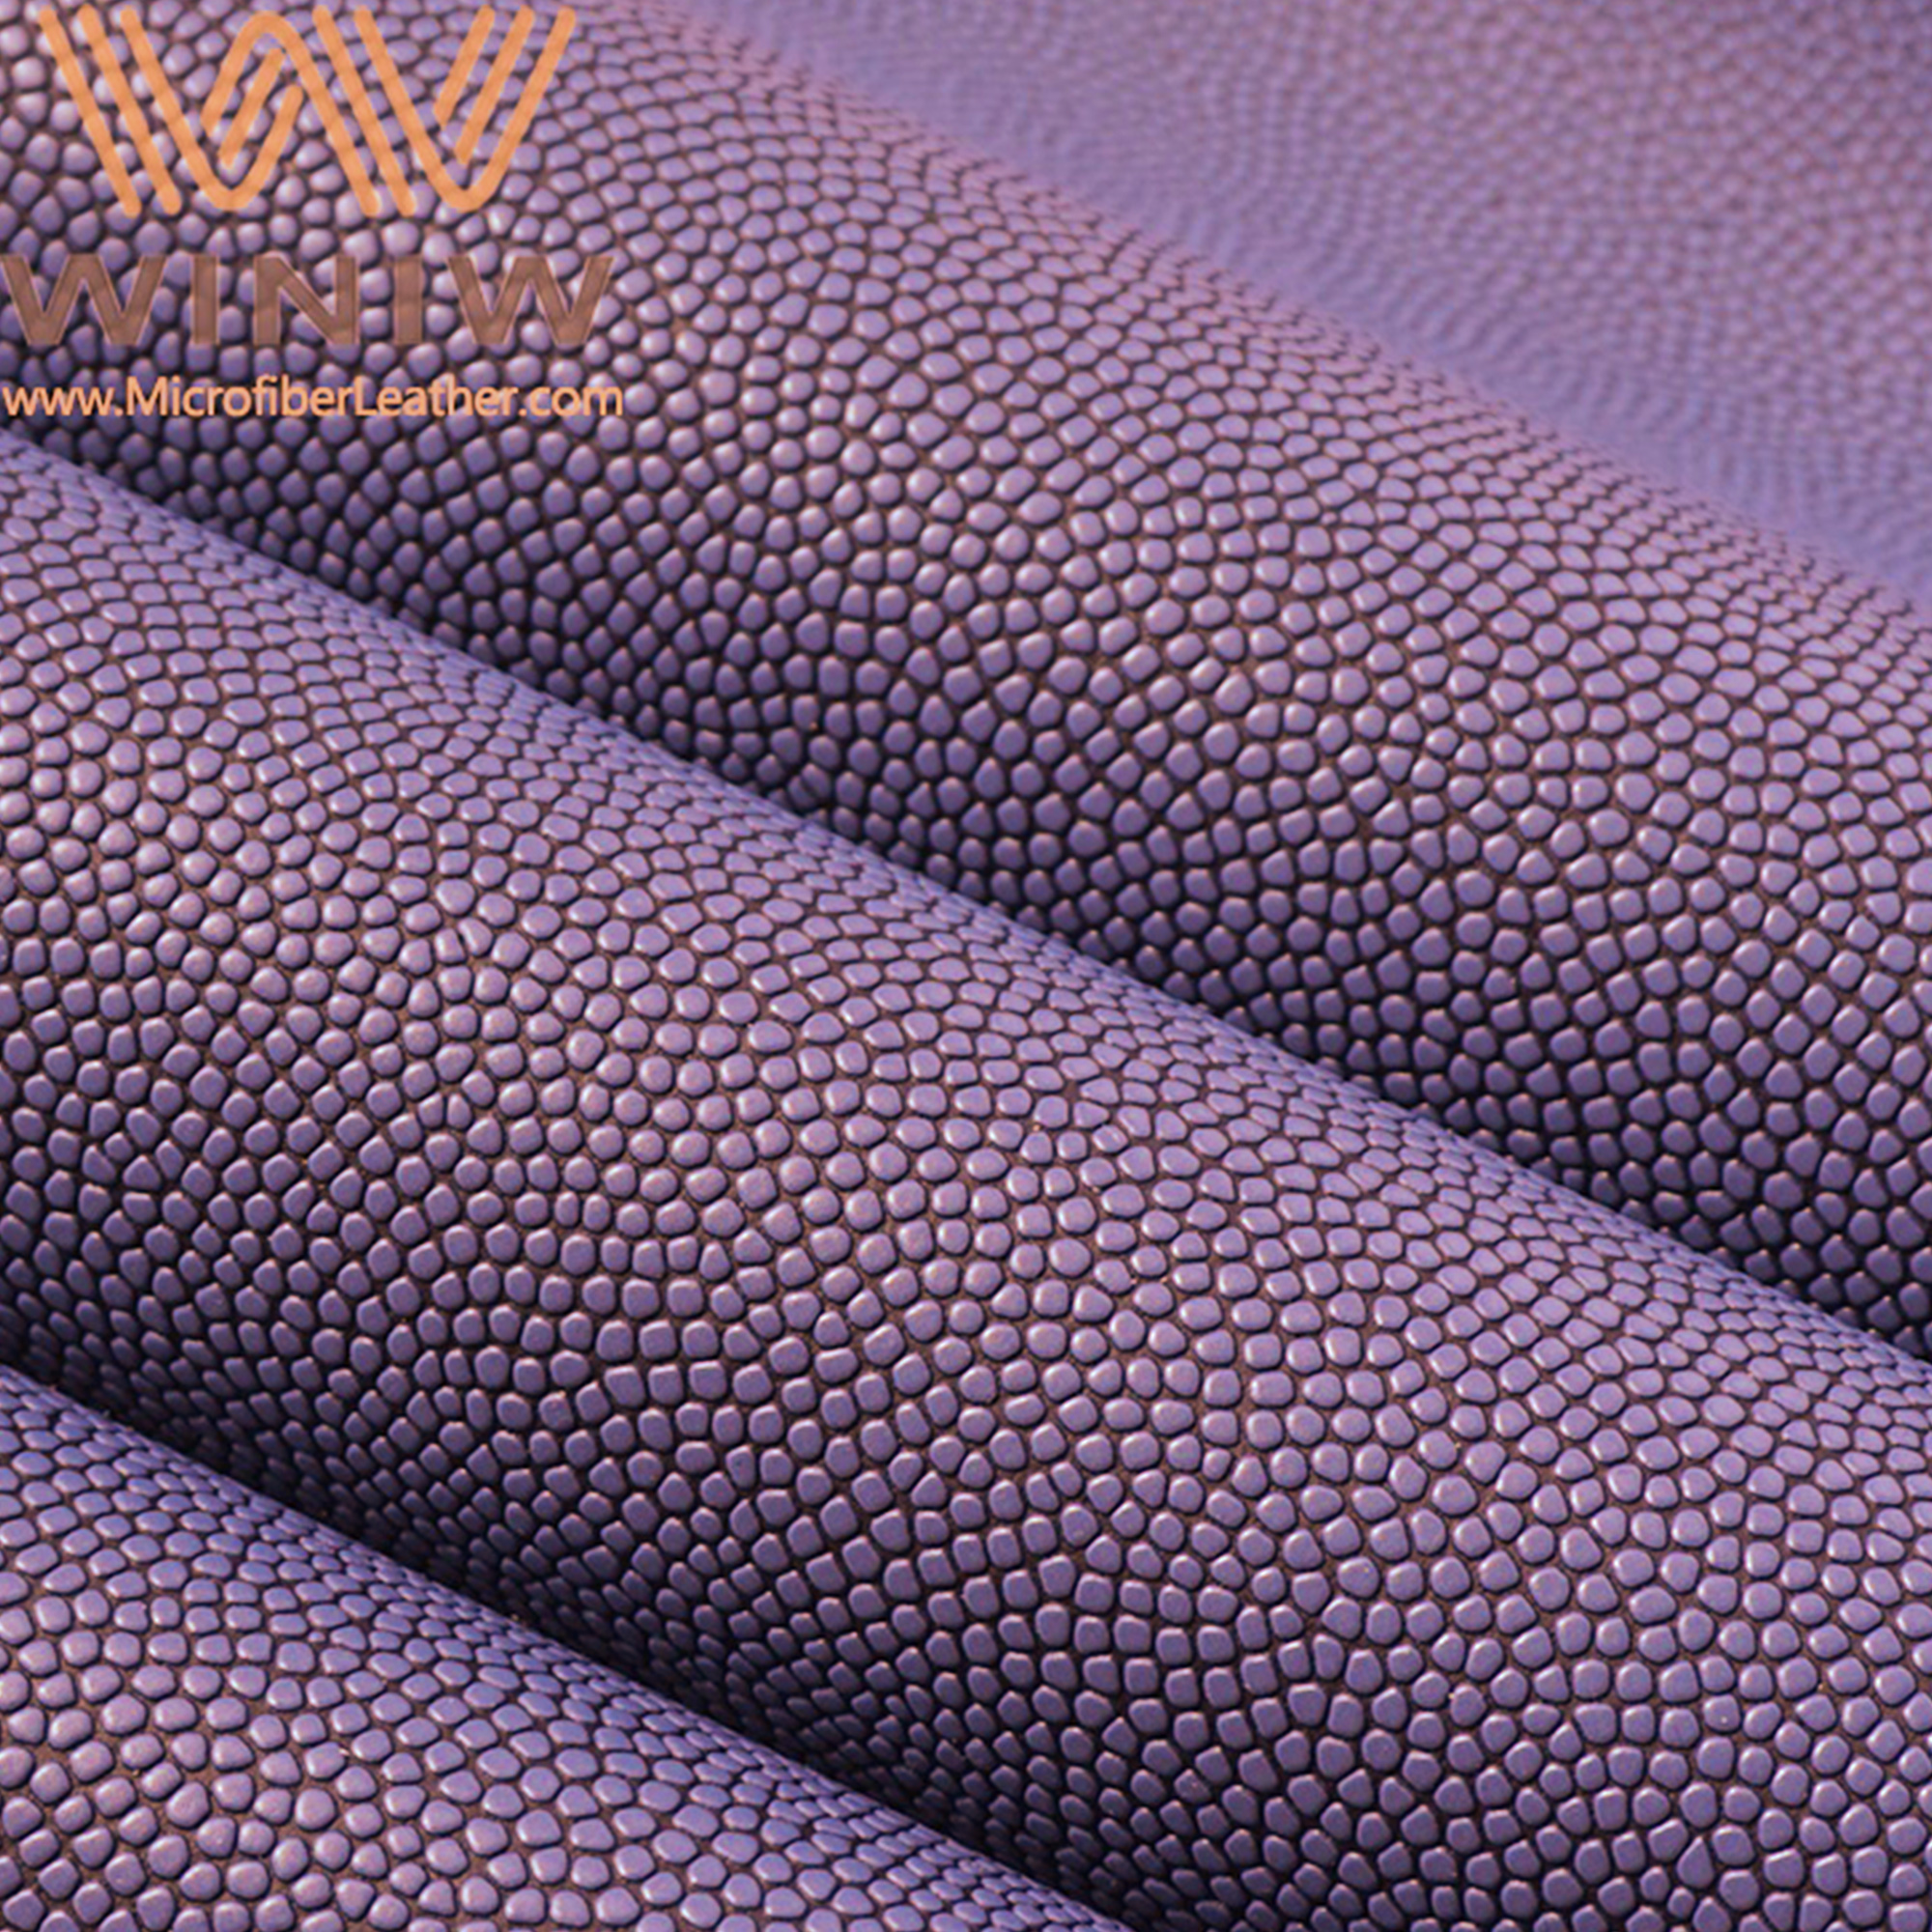 Super Thick Ball Leather Materials